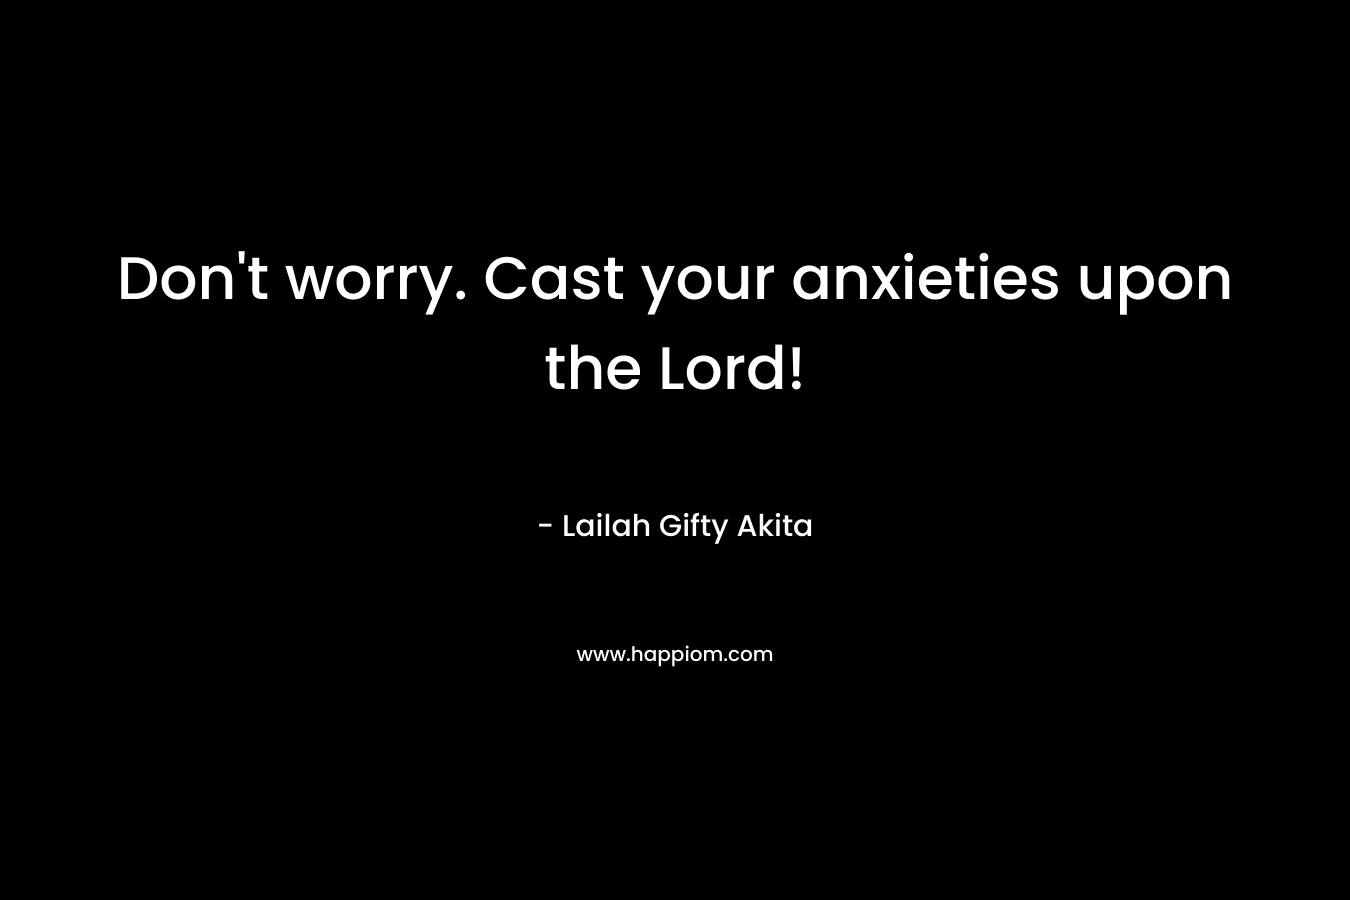 Don’t worry. Cast your anxieties upon the Lord! – Lailah Gifty Akita